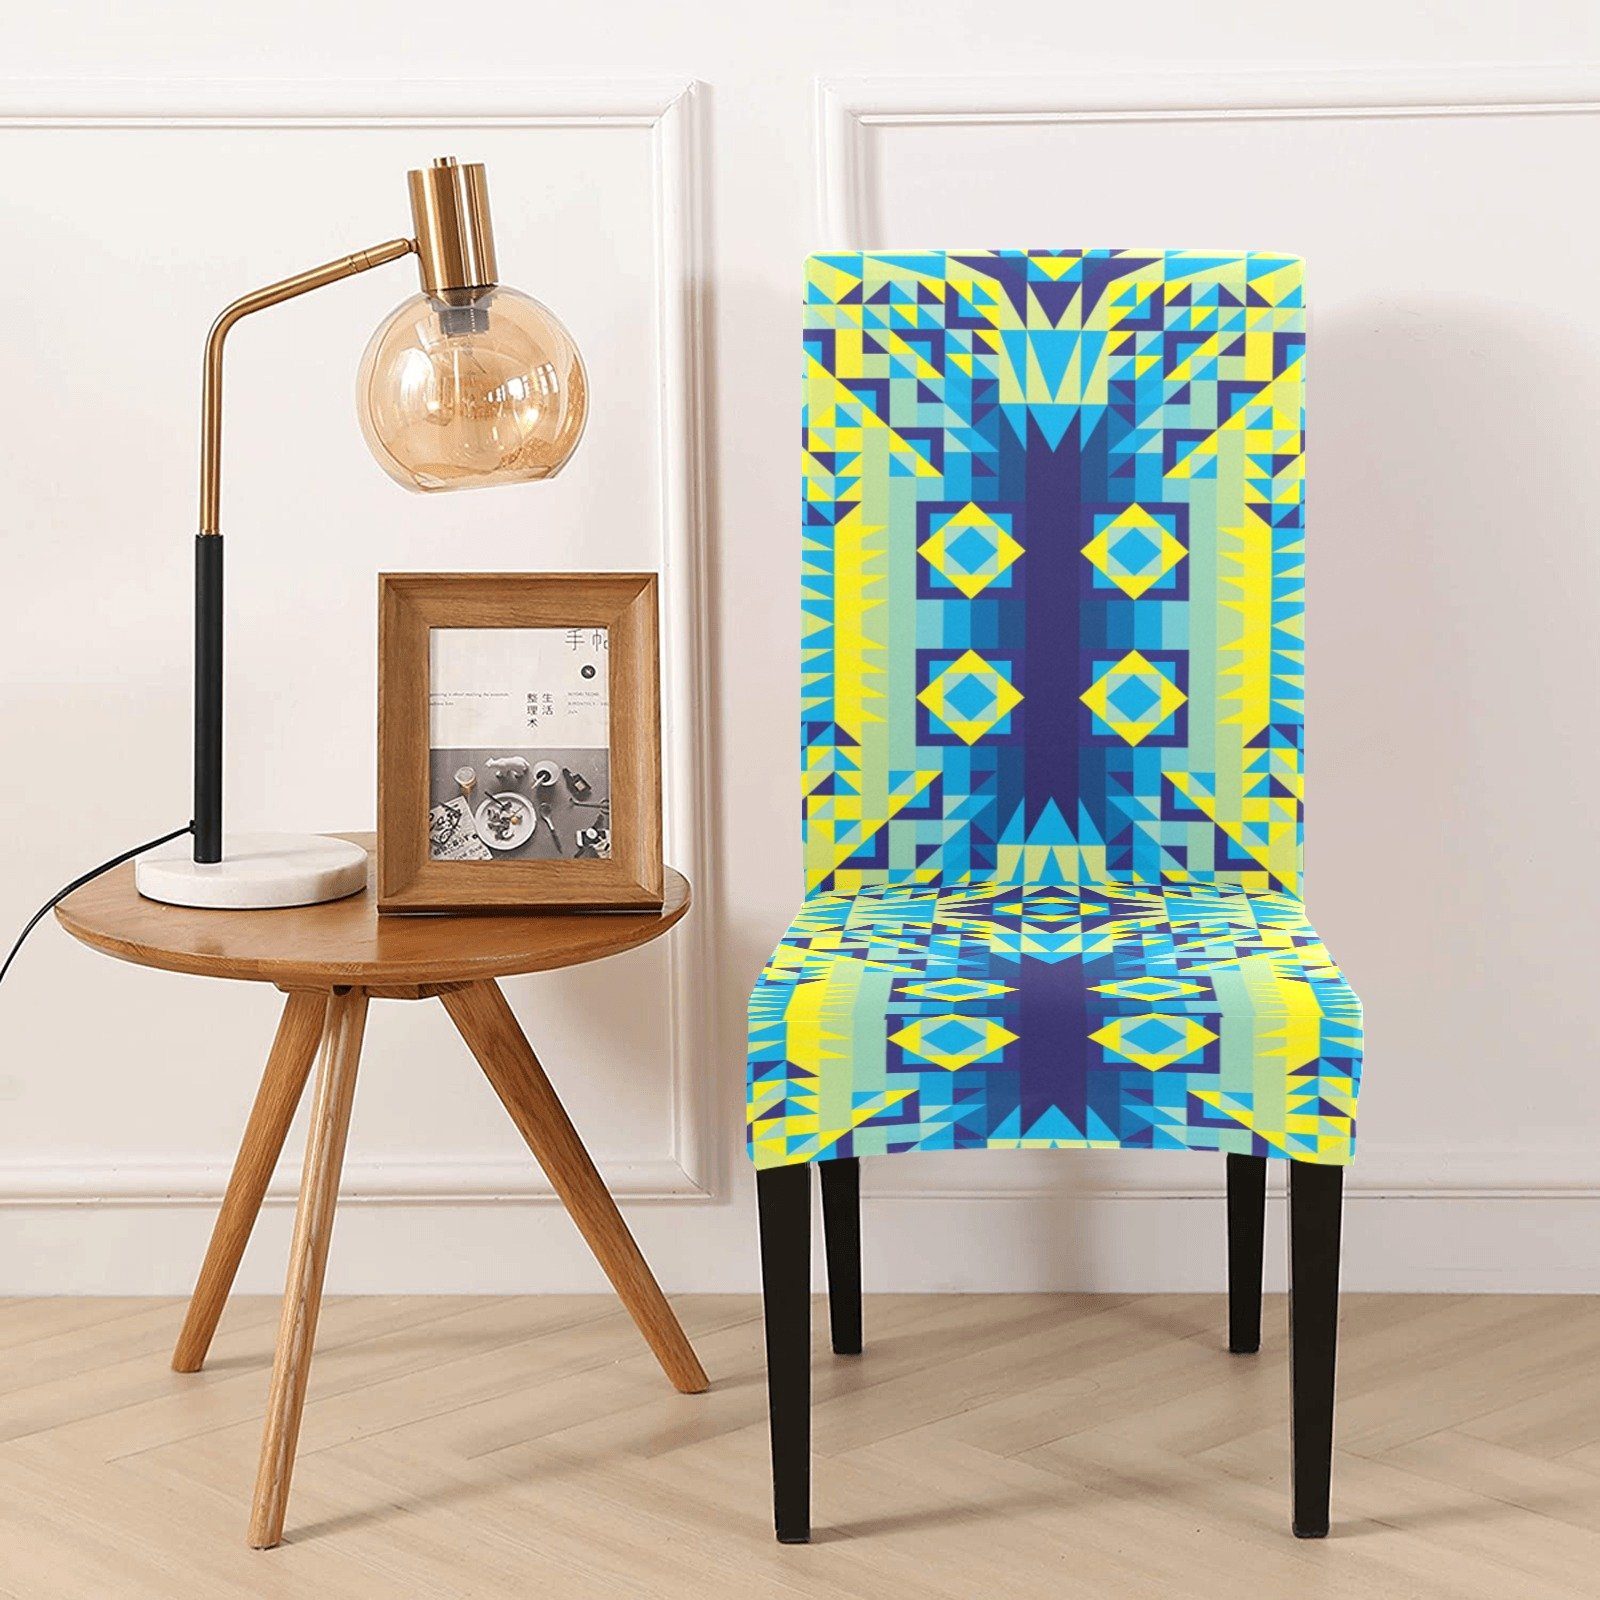 Kaleidoscope Jaune Bleu Chair Cover (Pack of 4) Chair Cover (Pack of 4) e-joyer 